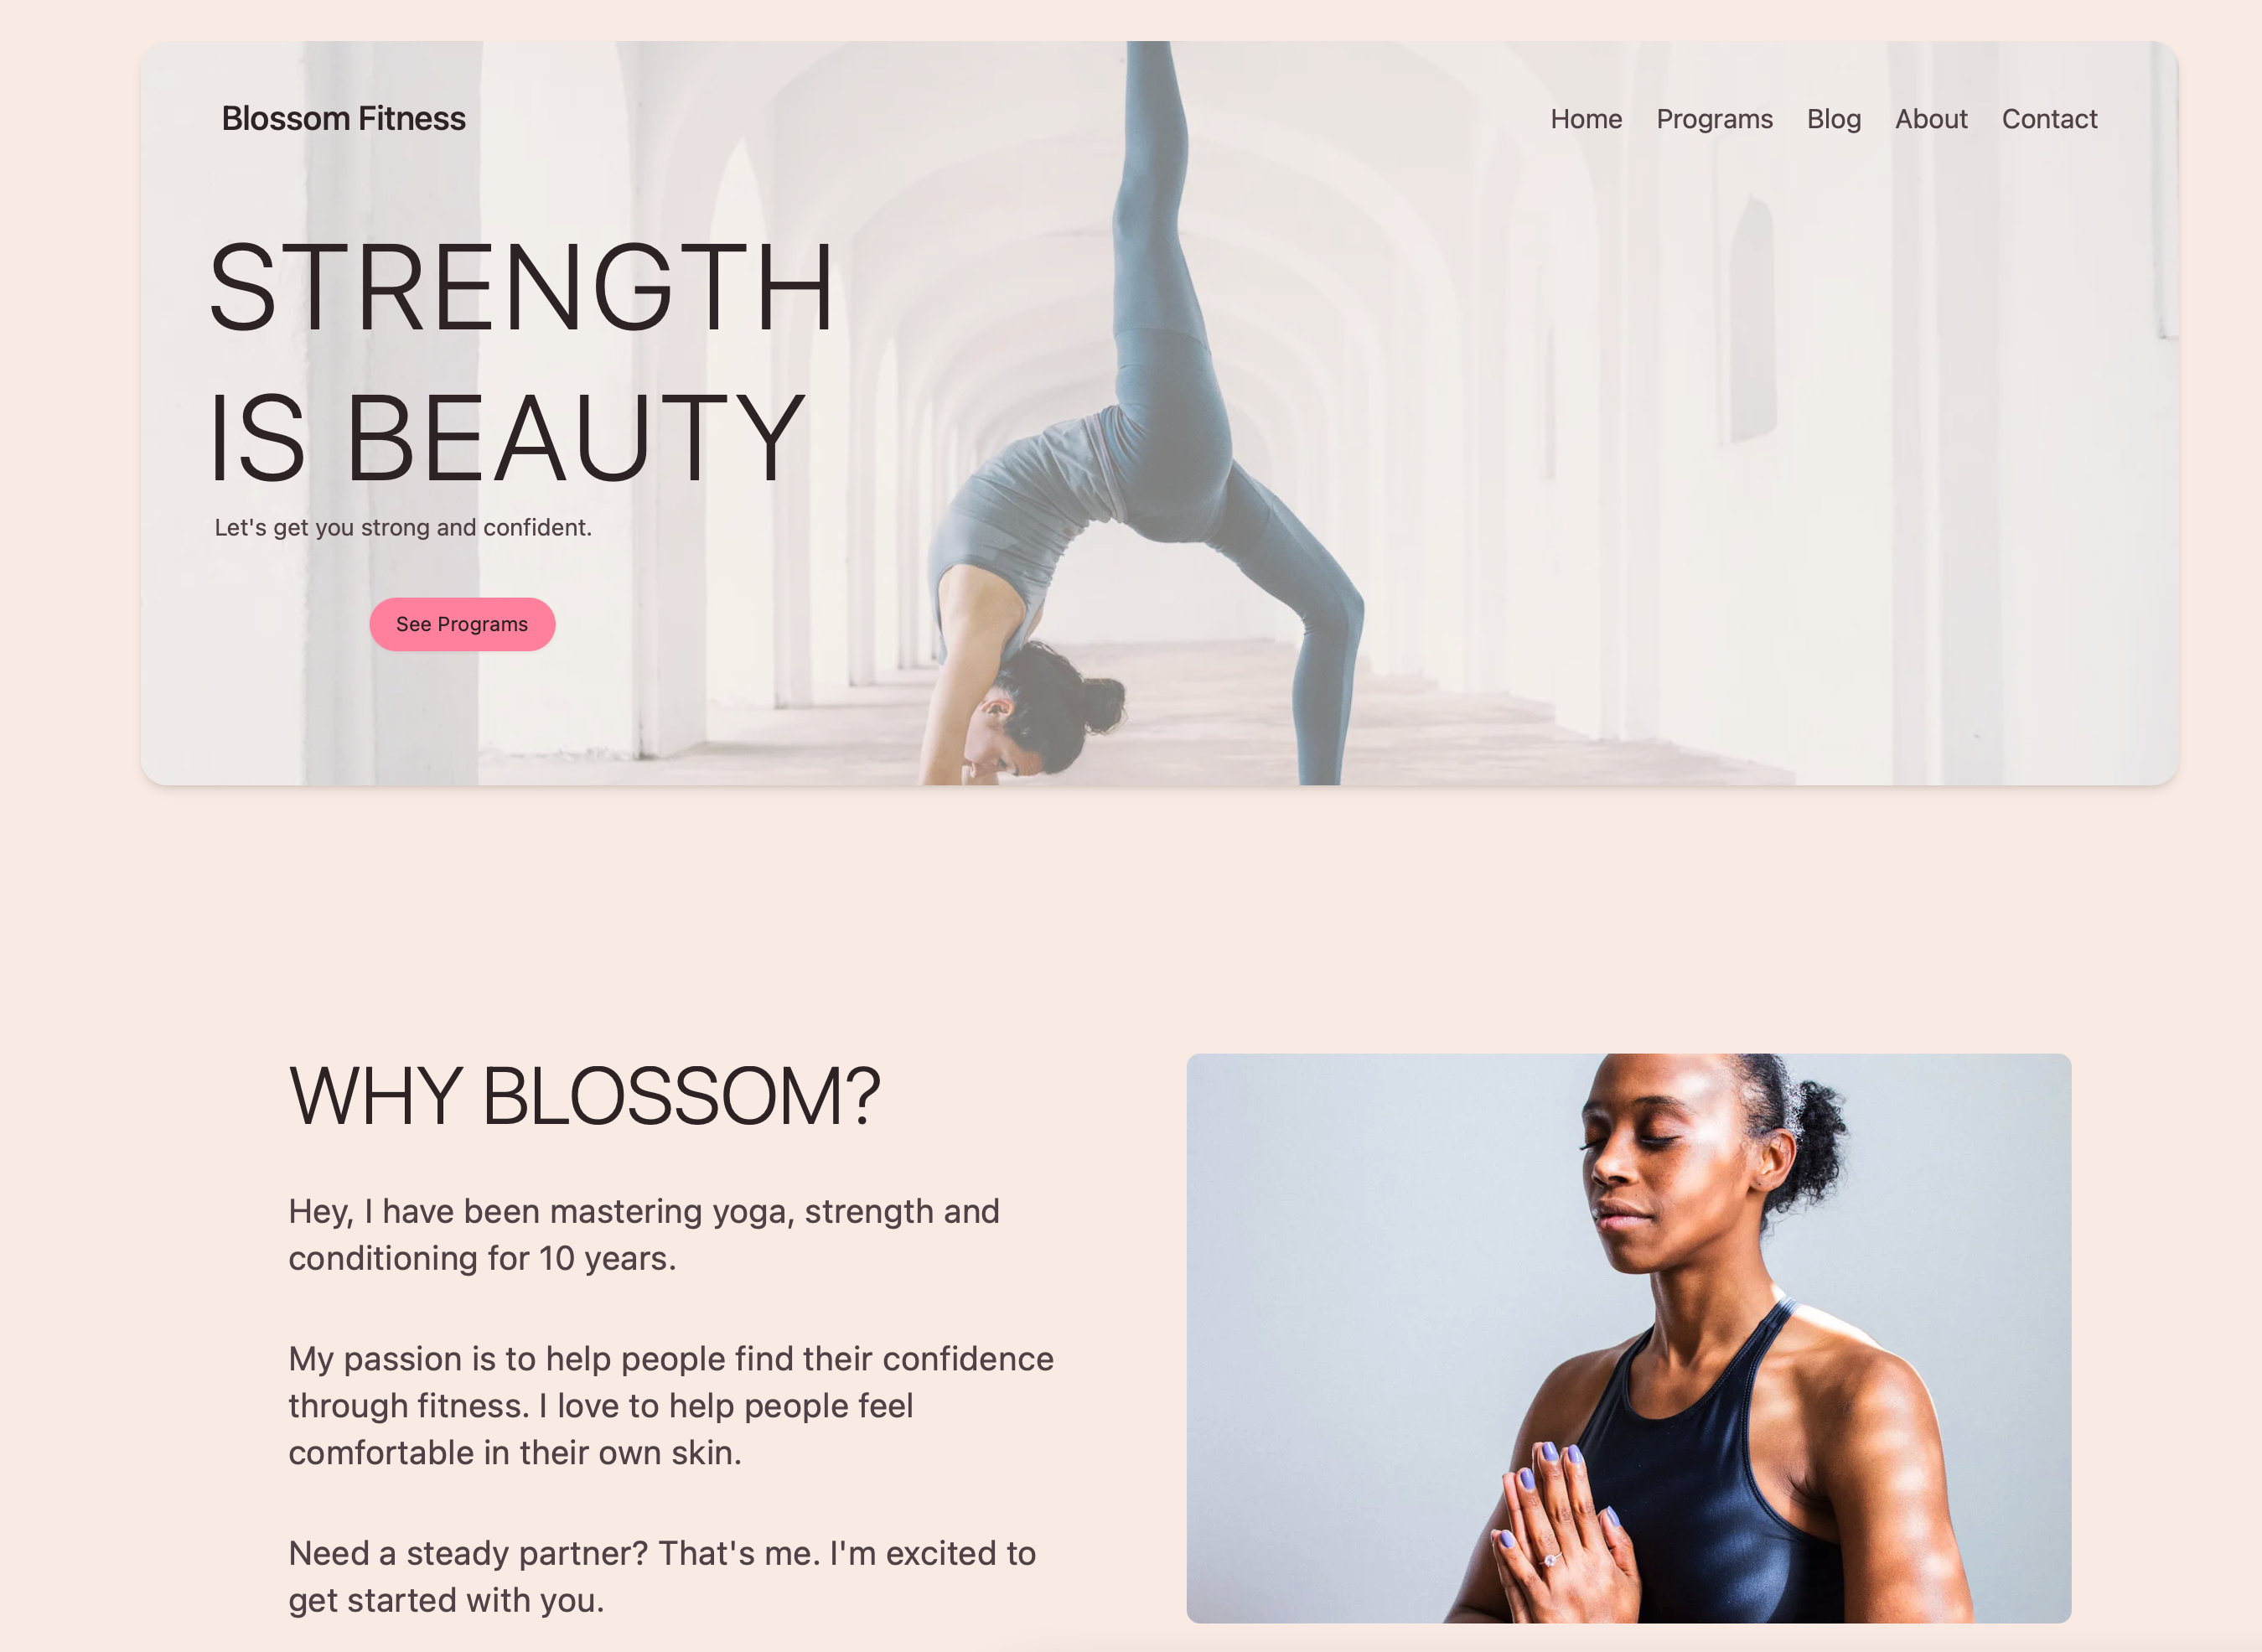 image of website with woman doing yoga